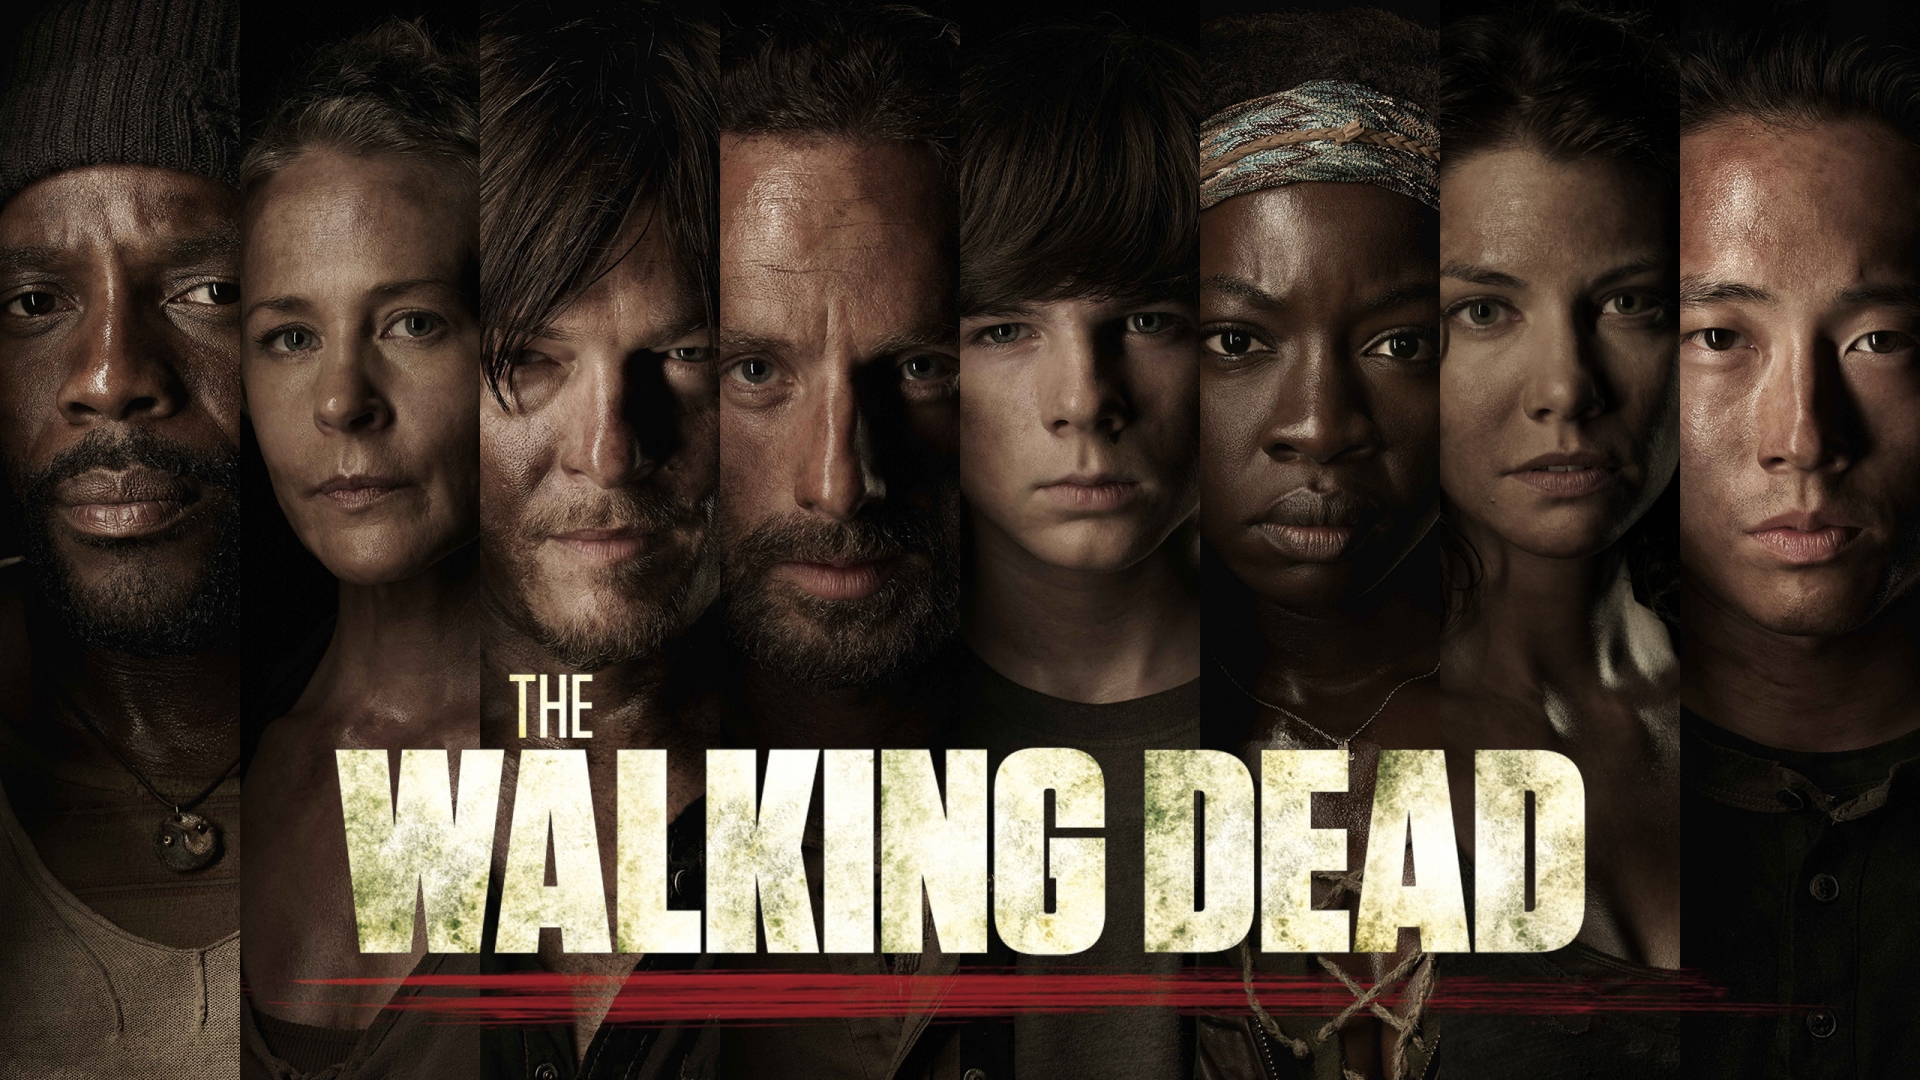 The Walking Dead for 1920 x 1080 HDTV 1080p resolution